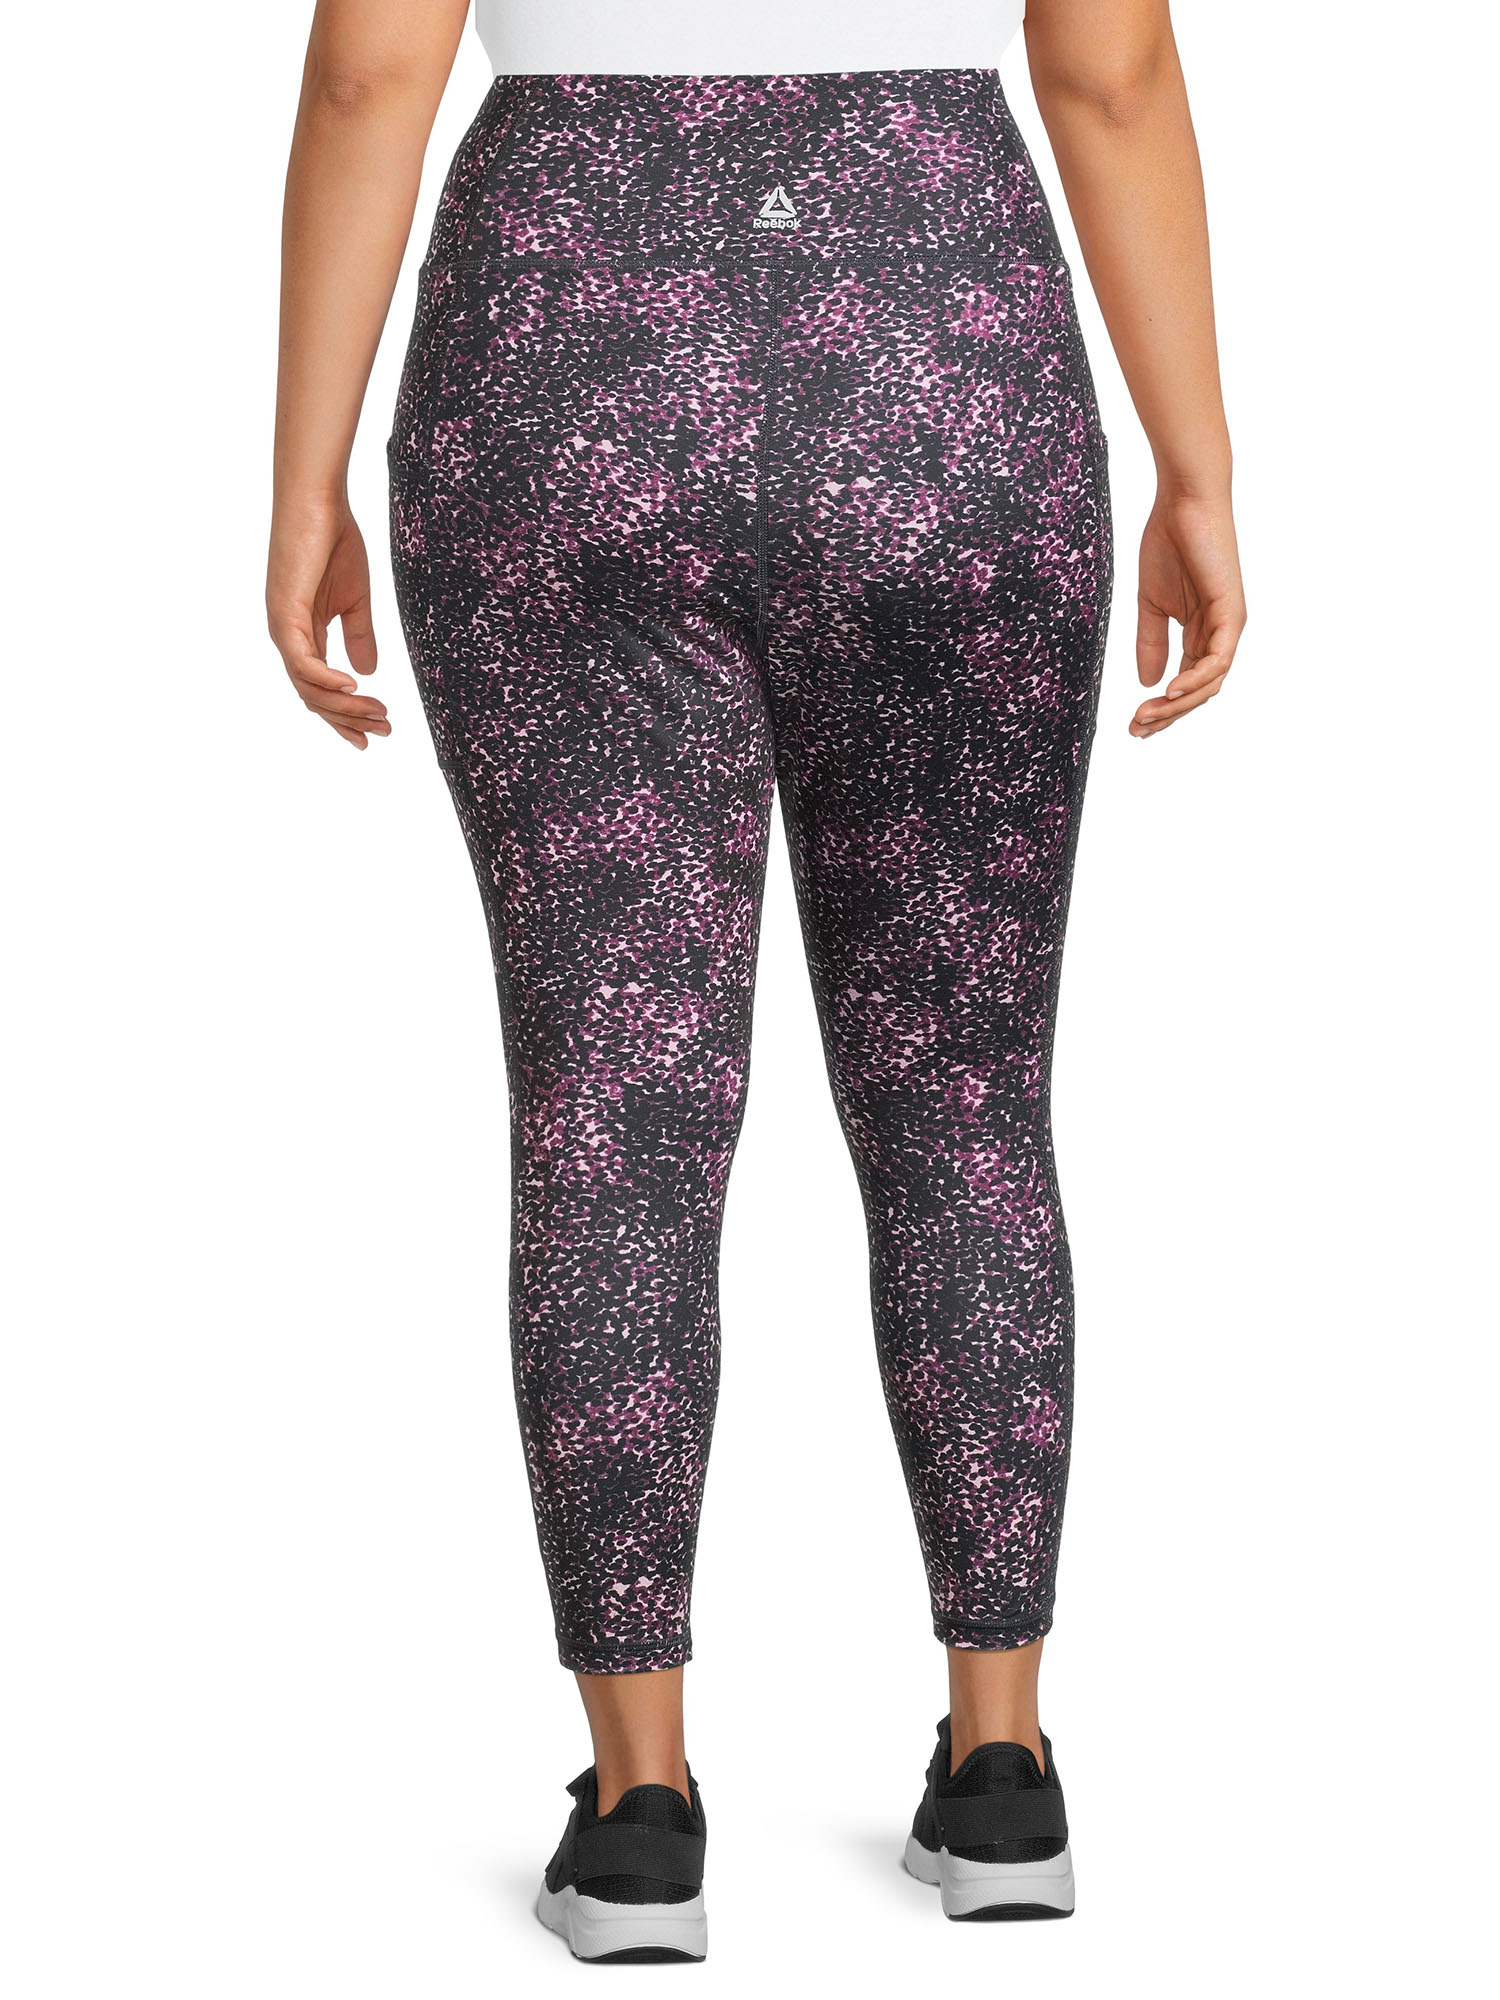 Reebok Women's Plus Size High-Waisted Athletic Leggings with Side Pockets - image 4 of 5